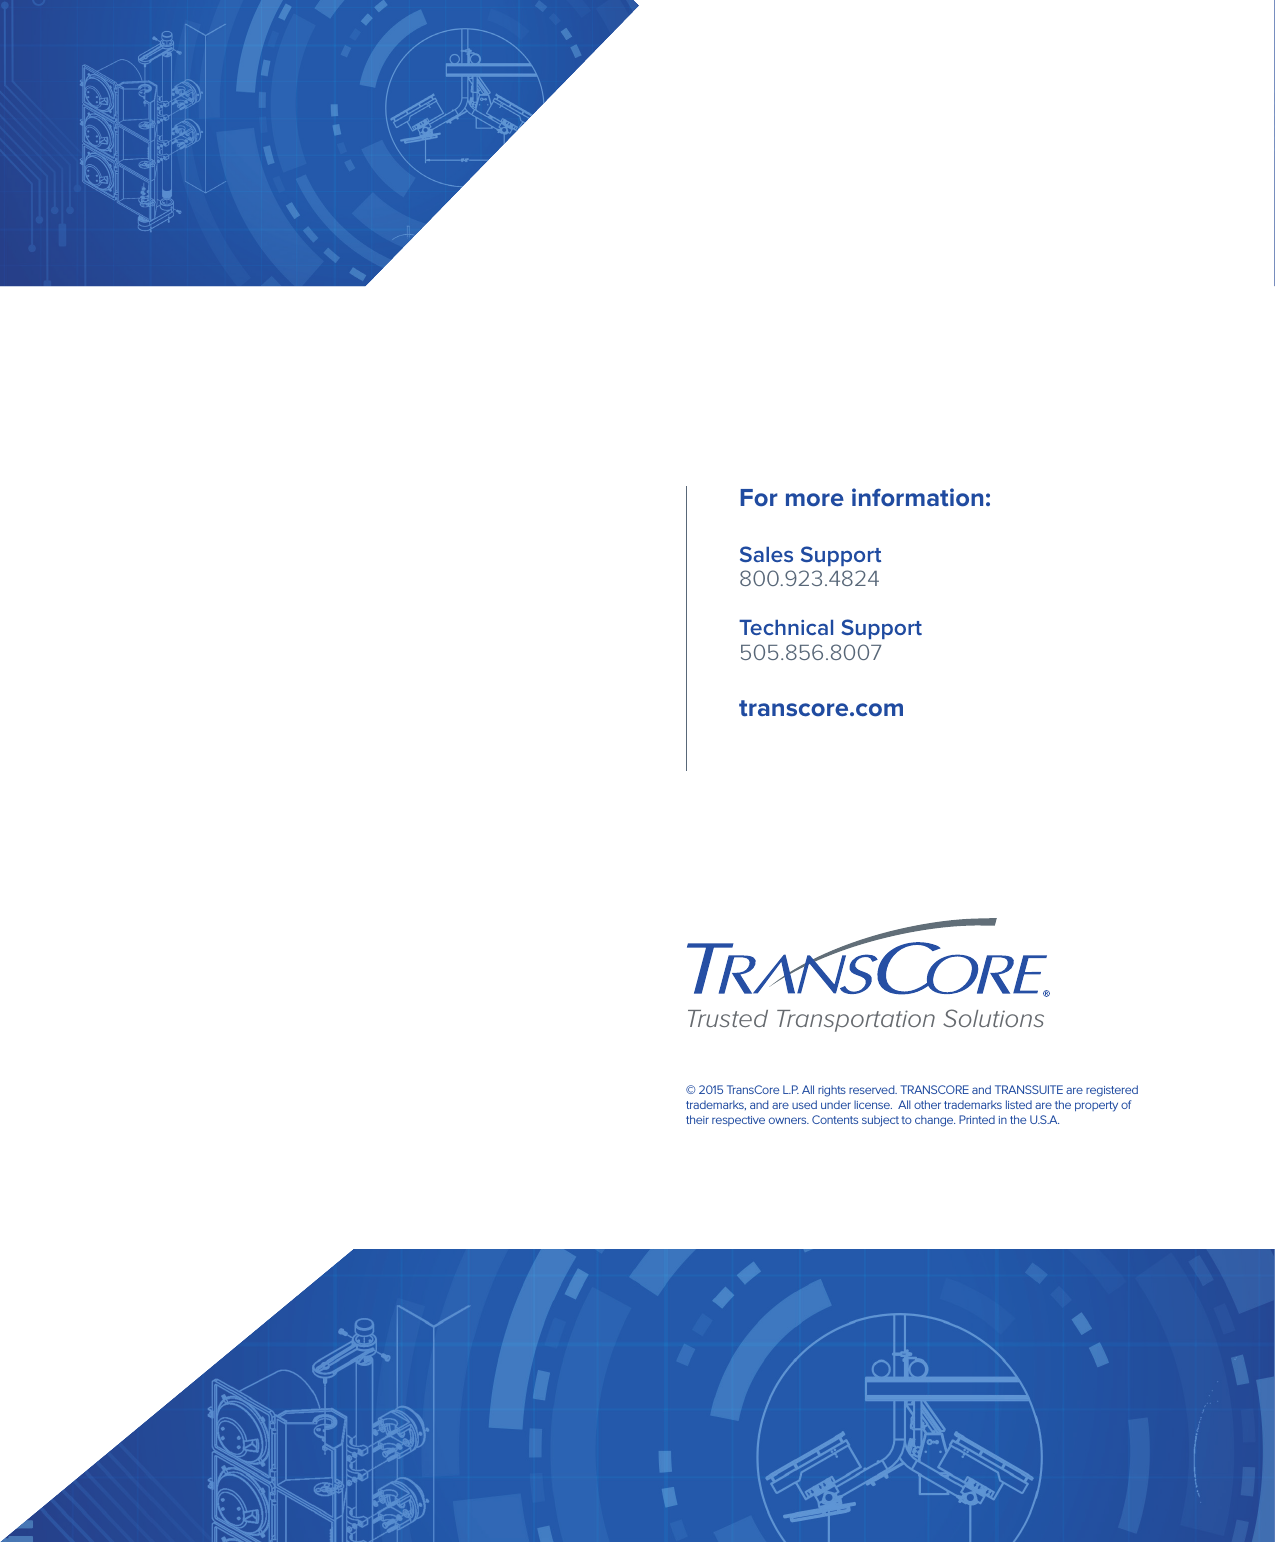 For more information: Sales Support 800.923.4824 Technical Support 505.856.8007transcore.com  Trusted Transportation Solutions© 2015 TransCore L.P. All rights reserved. TRANSCORE and TRANSSUITE are registered trademarks, and are used under license.  All other trademarks listed are the property of their respective owners. Contents subject to change. Printed in the U.S.A.